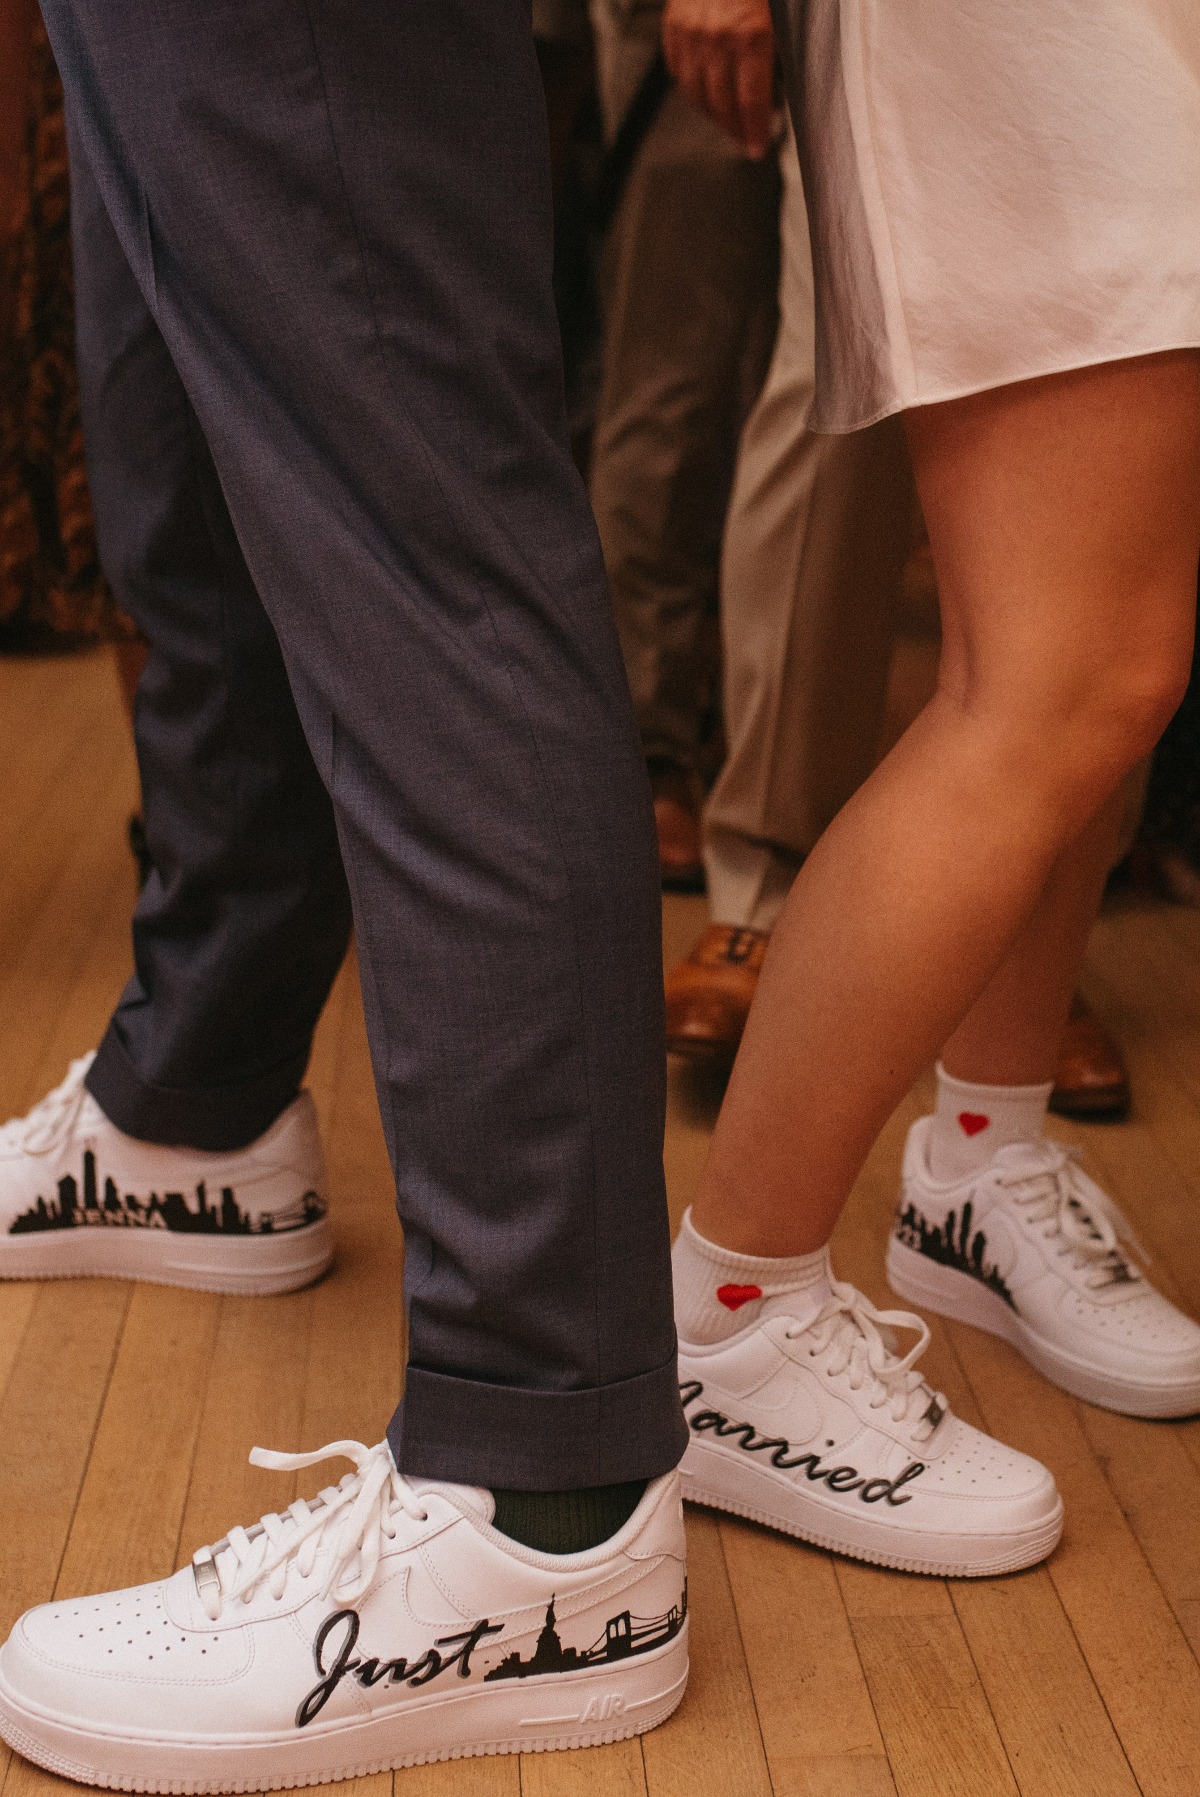 Just married custom embroidered his and her sneakers 